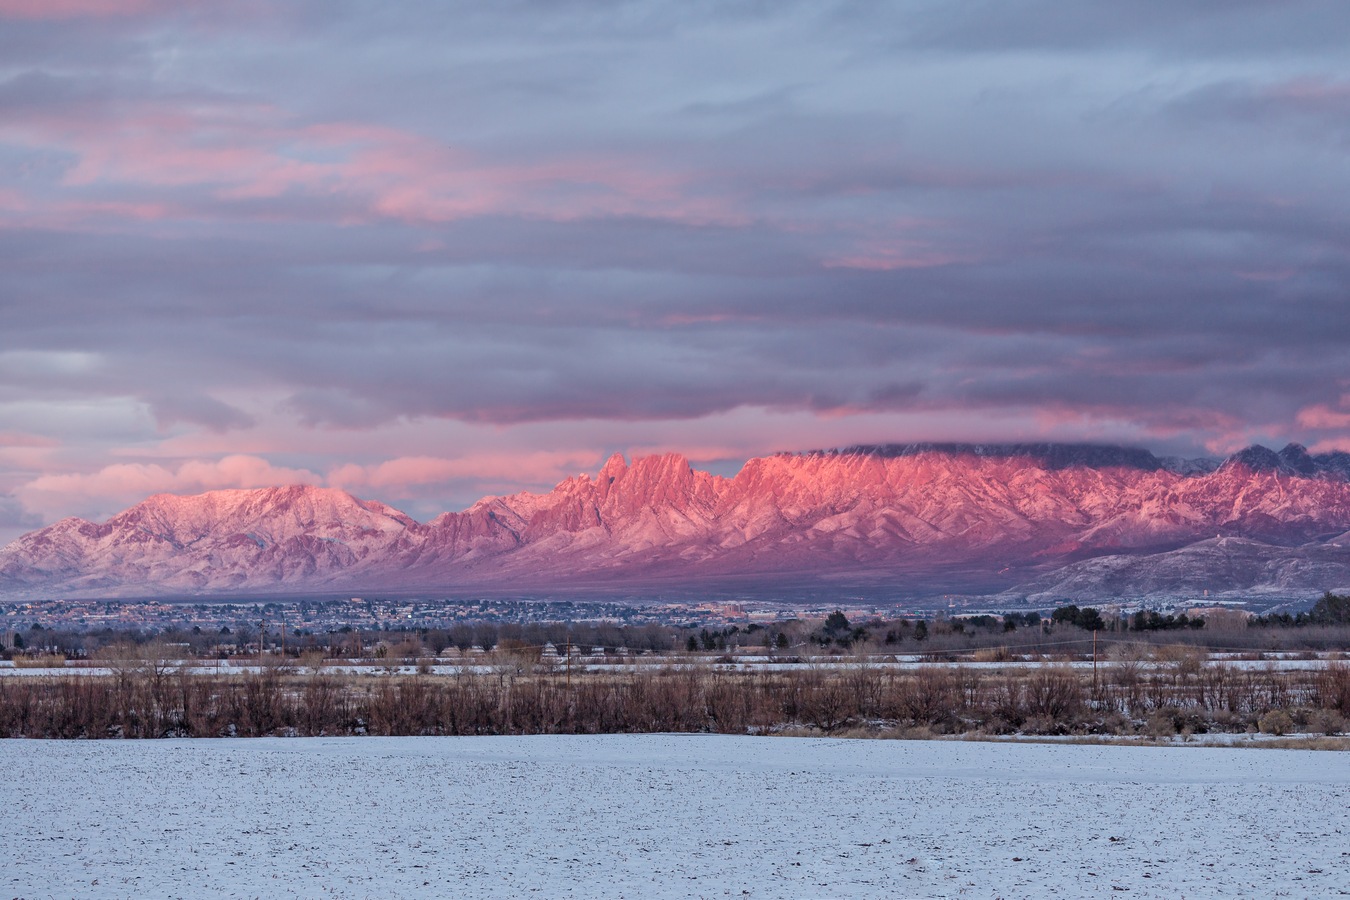 The Mesilla Valley, at an elevation of about 4000, usually gets a few days of light snow accumulation each winter